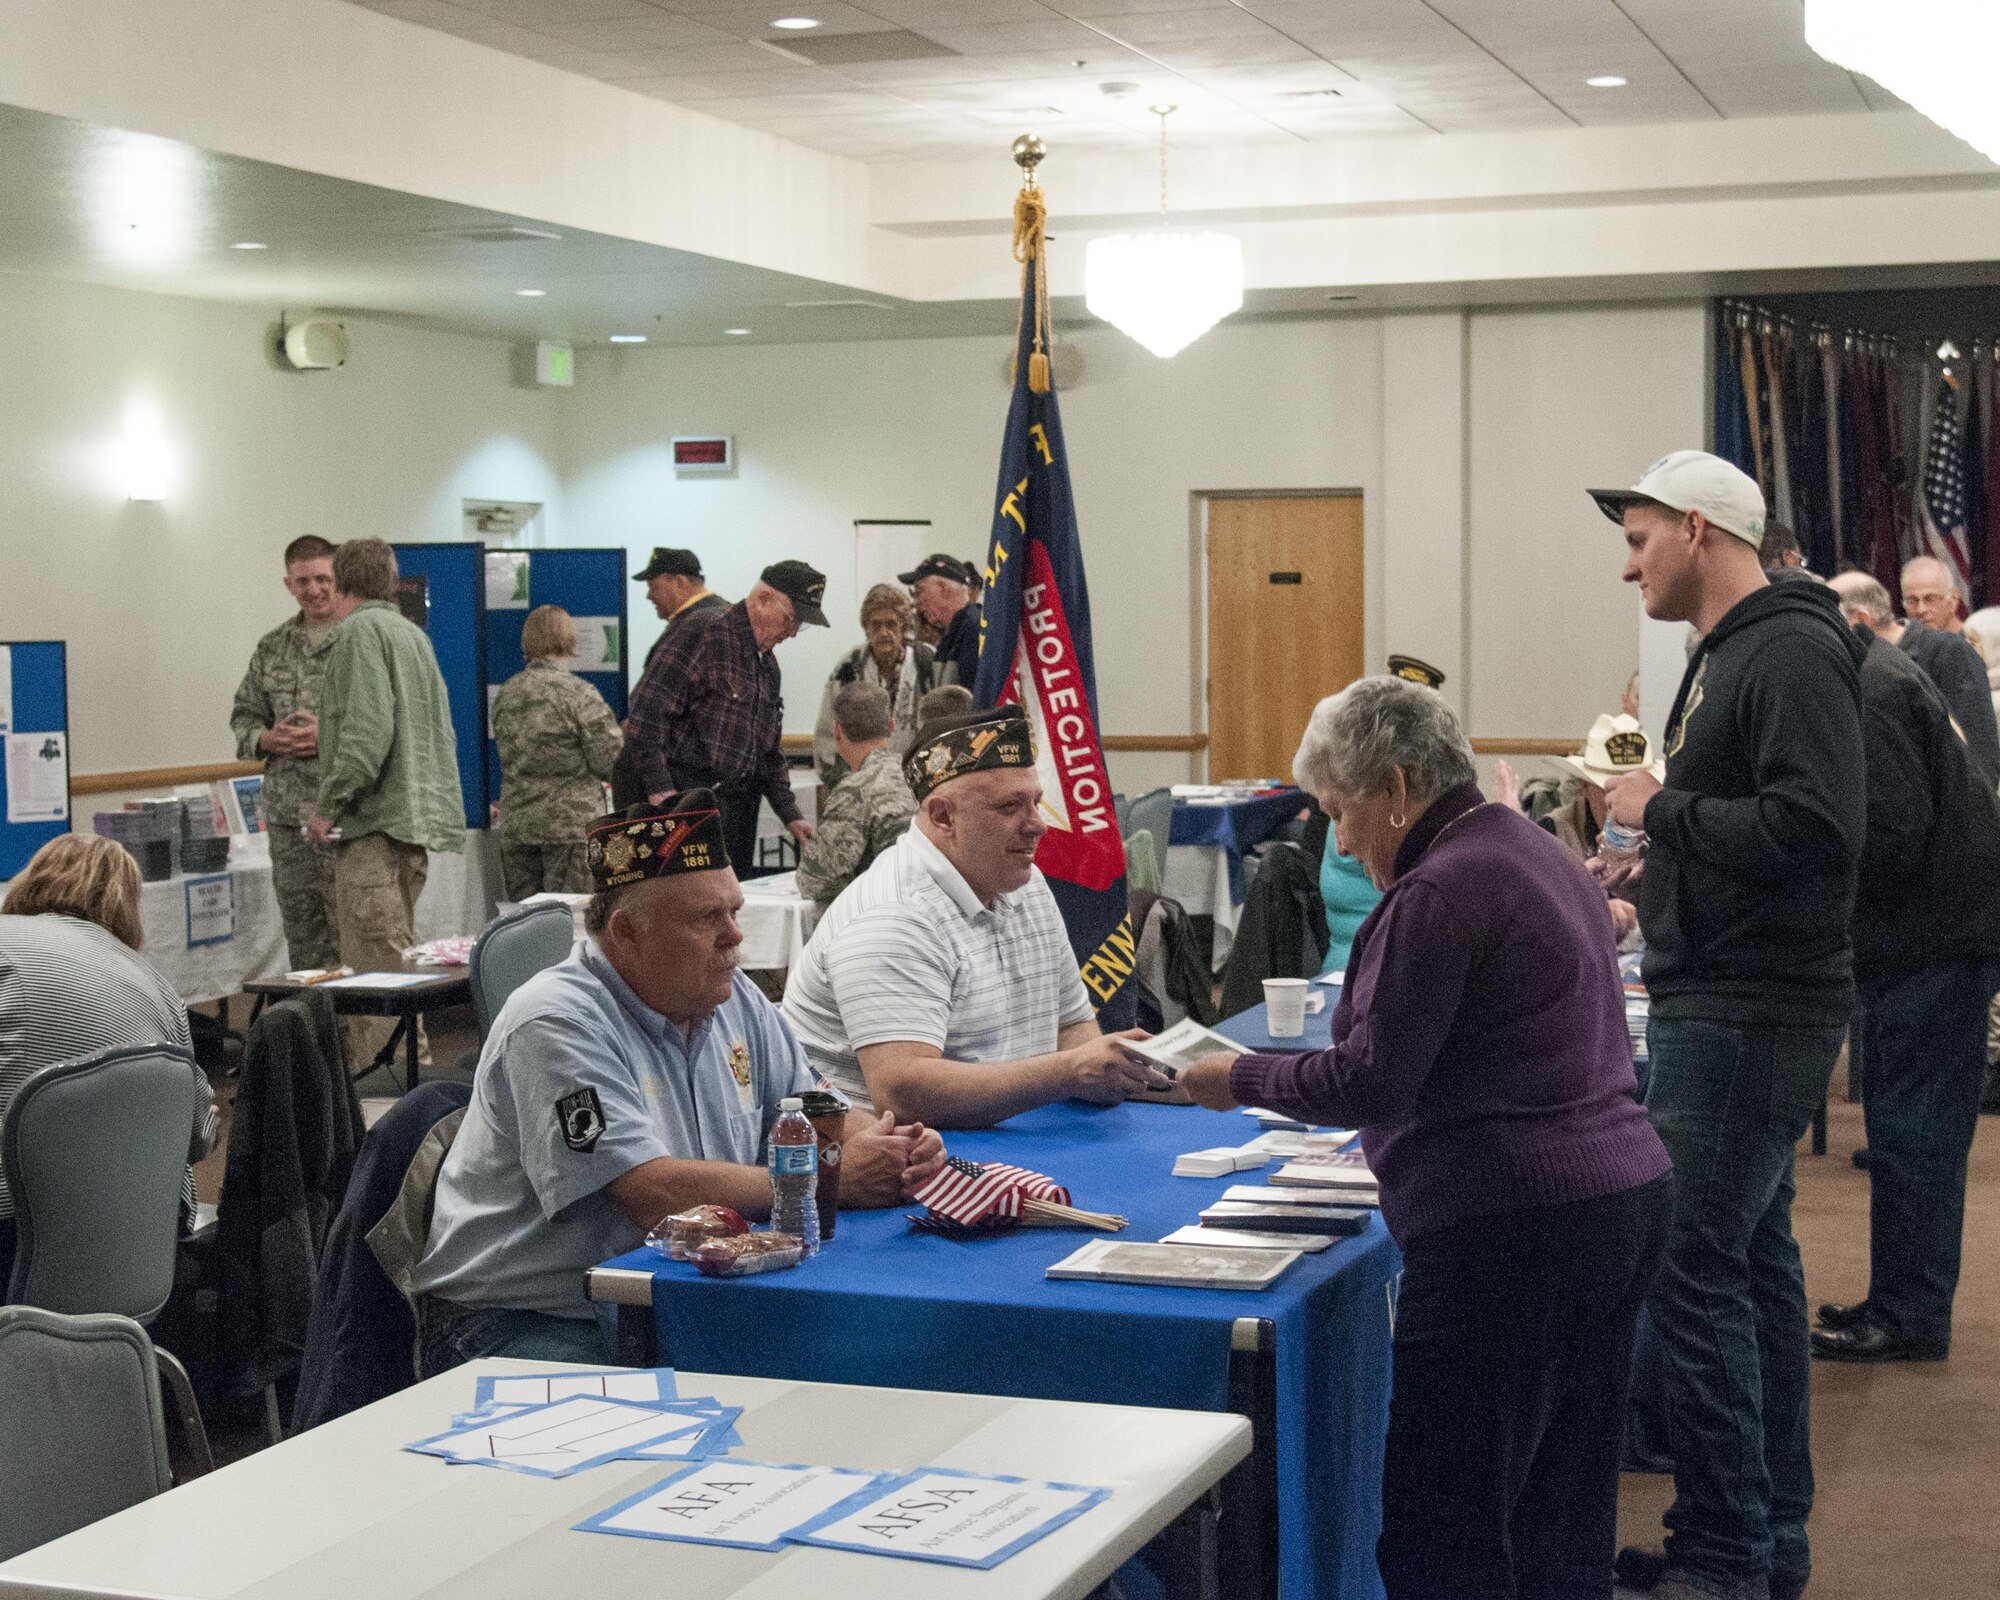 Military retirees, loved ones, community organization representatives and Airmen meet and share information with one another during Retiree Appreciation Day on F.E. Warren Air Force Base, Wyo., April 30, 2016. More than 150 guests attended the event and learned more about their retiree benefits. (U.S. Air Force photo by Senior Airman Jason Wiese)